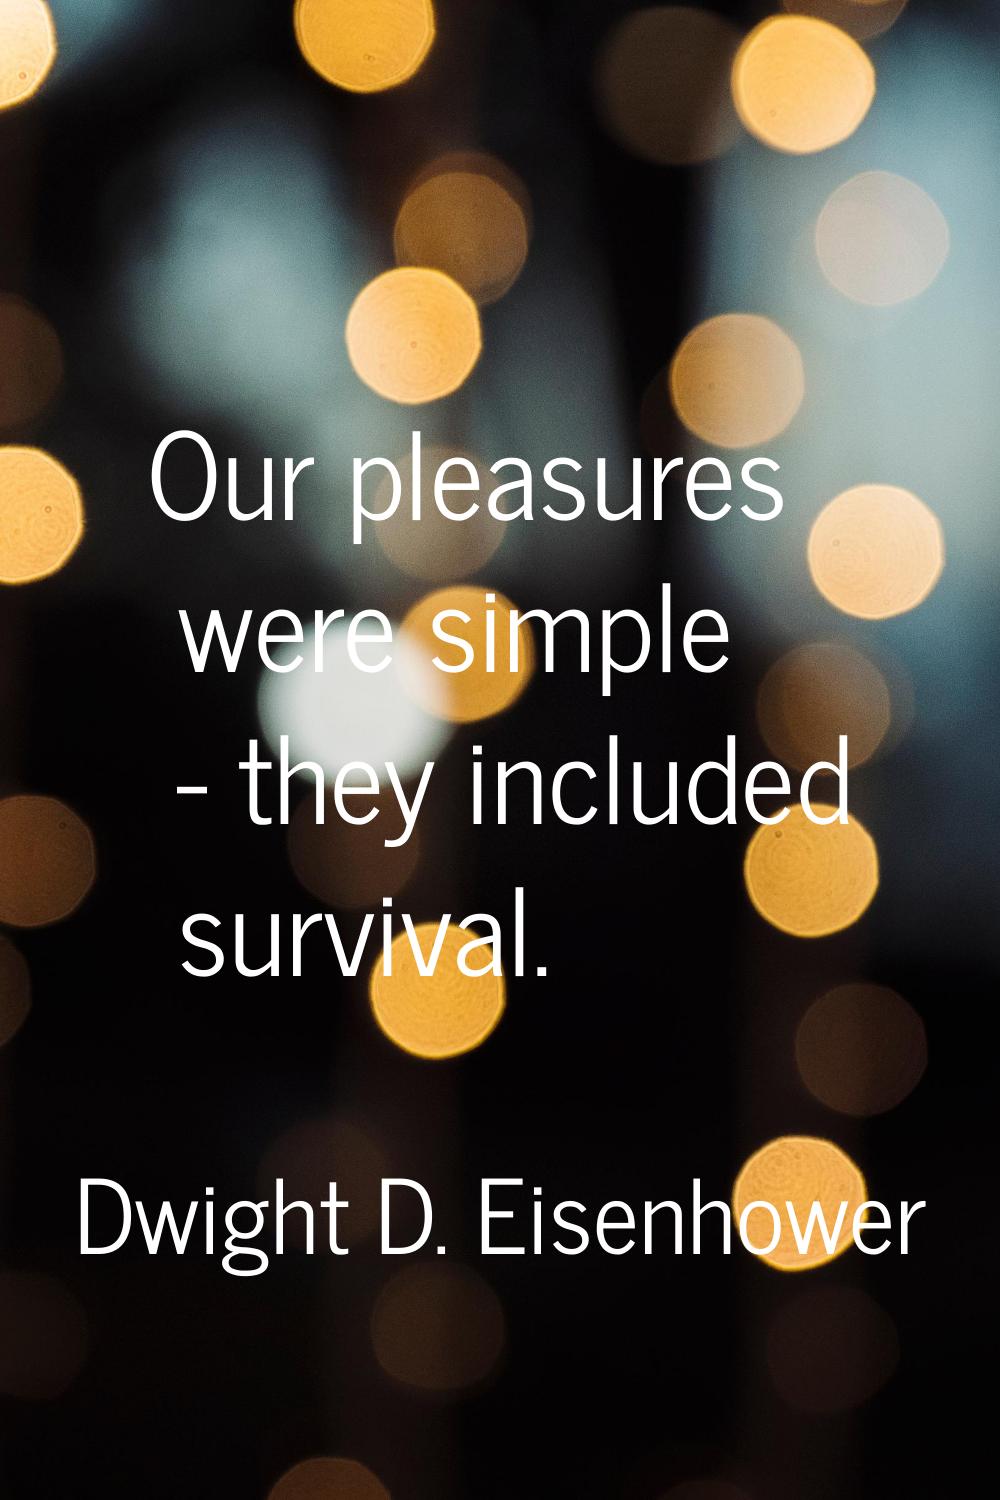 Our pleasures were simple - they included survival.